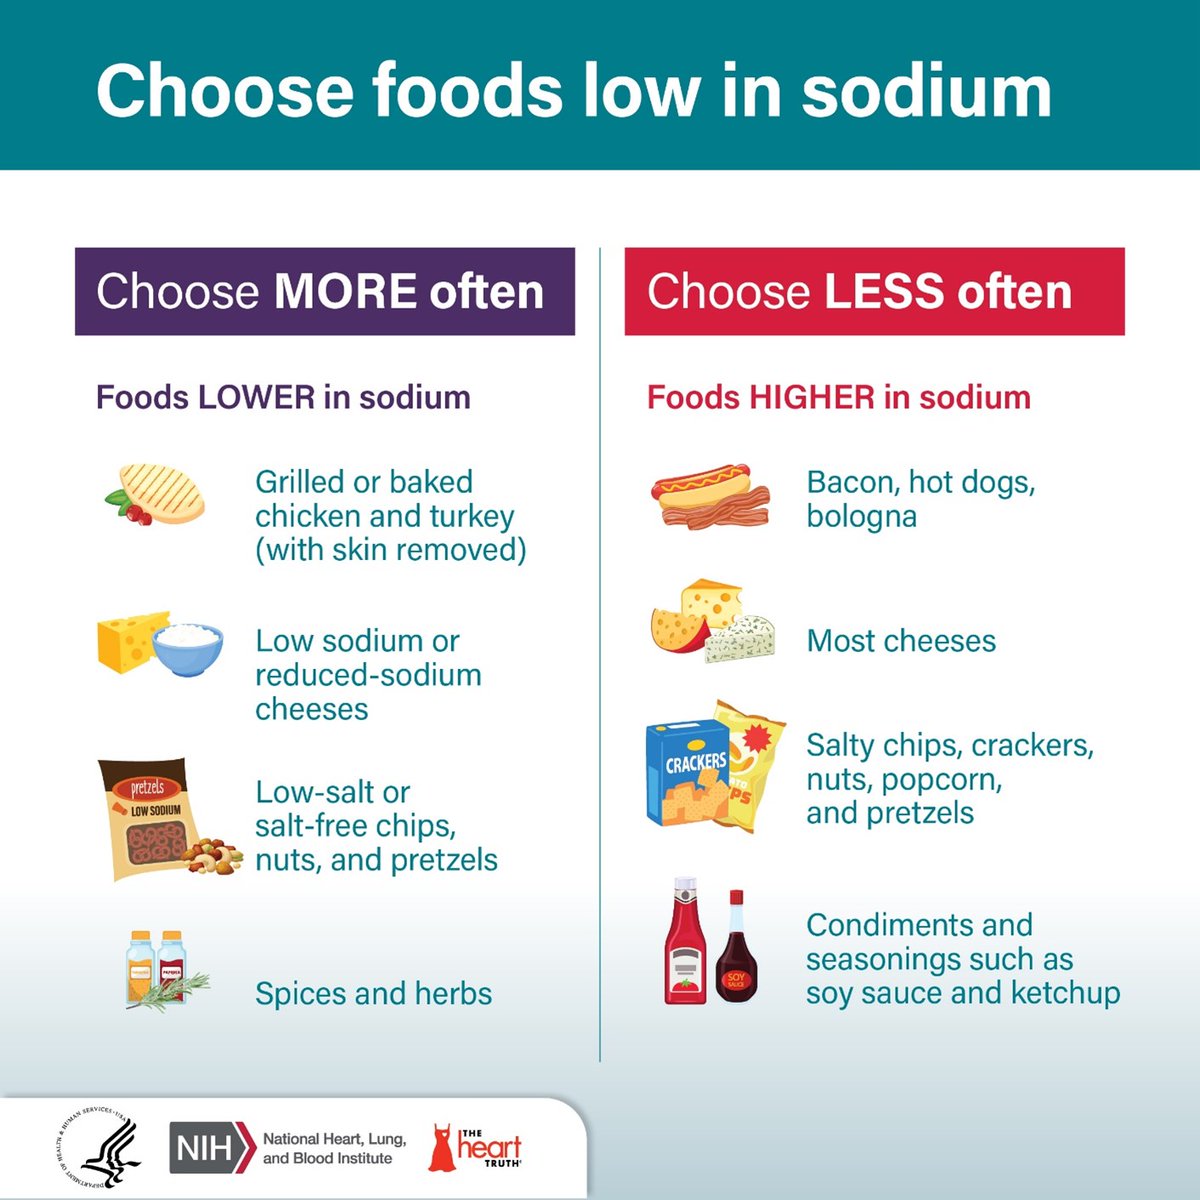 May is #HighBloodPressureMonth! Choosing and preparing foods that are lower in salt and sodium may help prevent or lower high blood pressure.